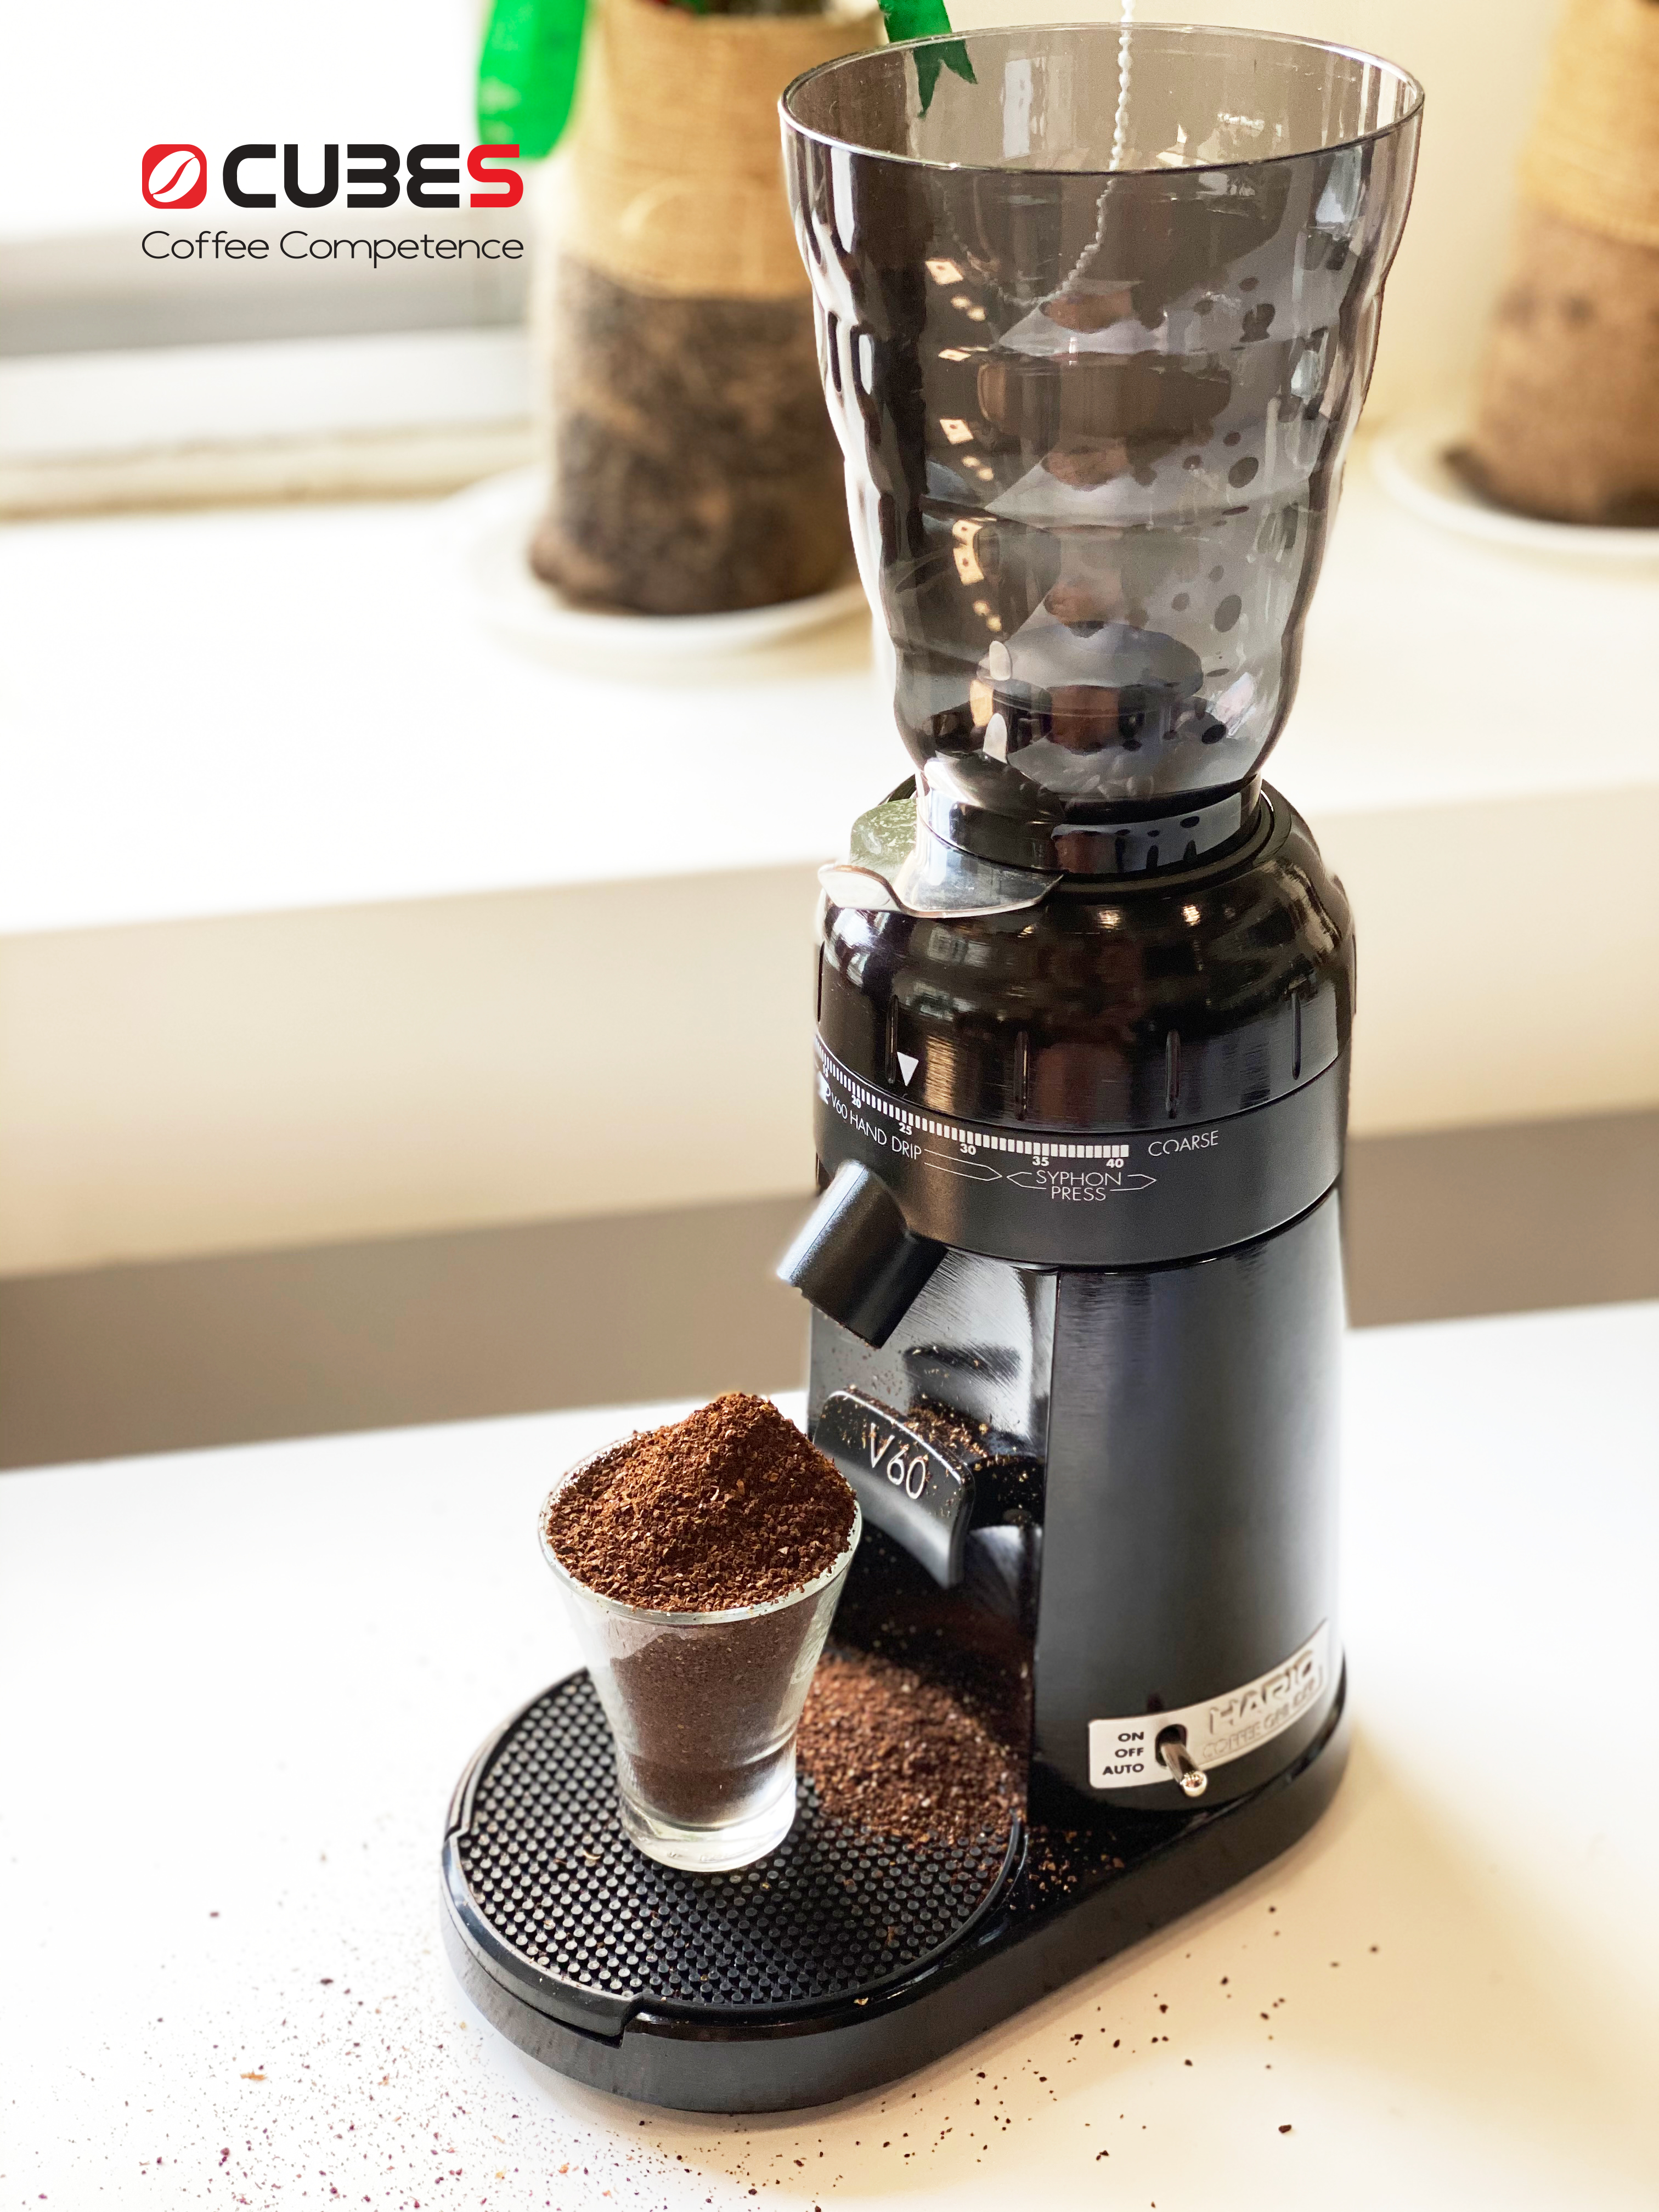 Should I grind my coffee coarse or fine?